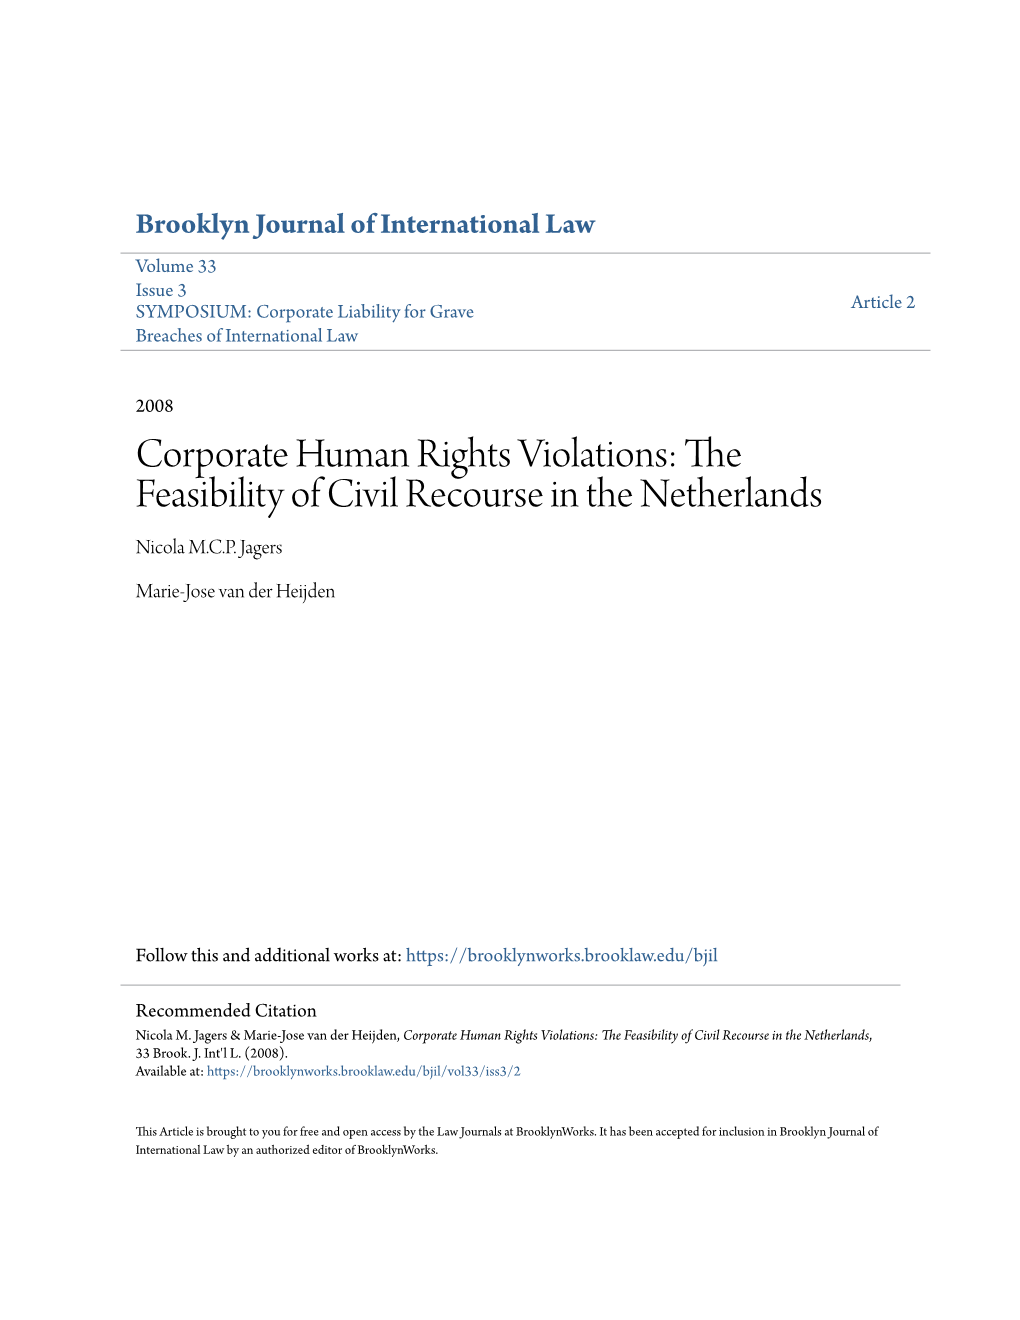 Corporate Human Rights Violations: the Feasibility of Civil Recourse in the Netherlands Nicola M.C.P